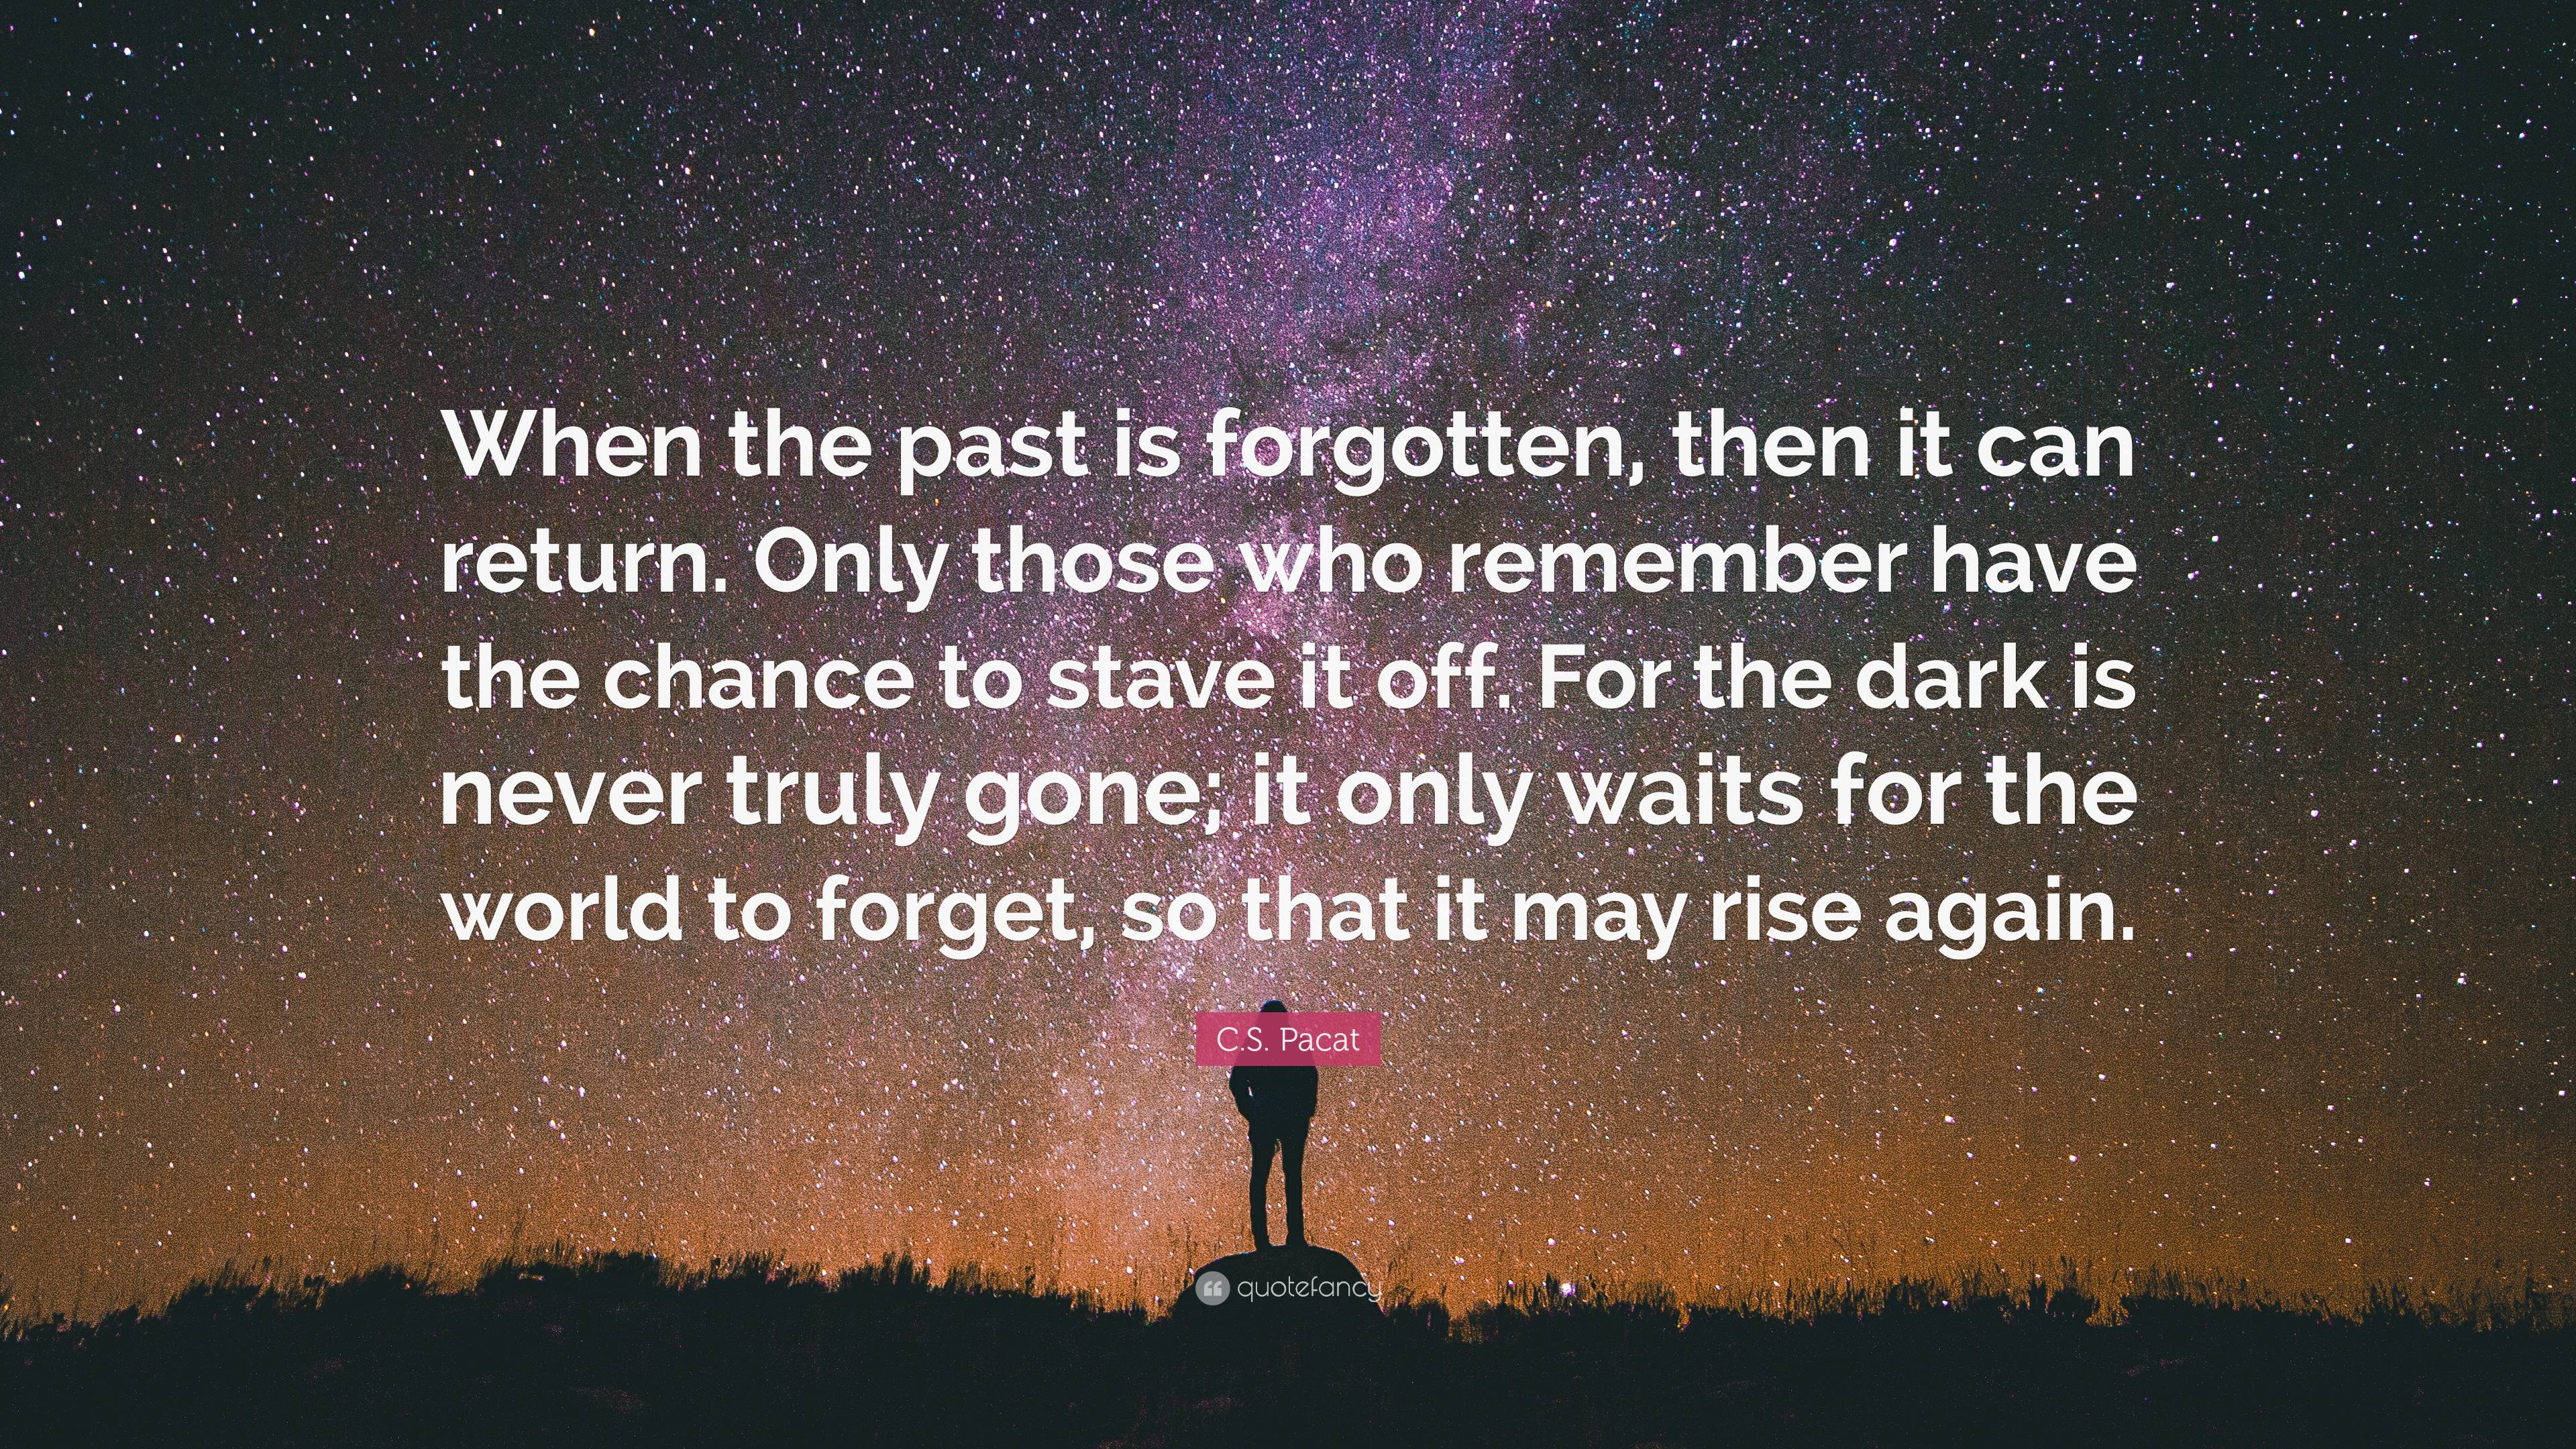 C.S. Pacat Quote: “When the past is forgotten, then it can return. Only  those who remember have the chance to stave it off. For the dark is”